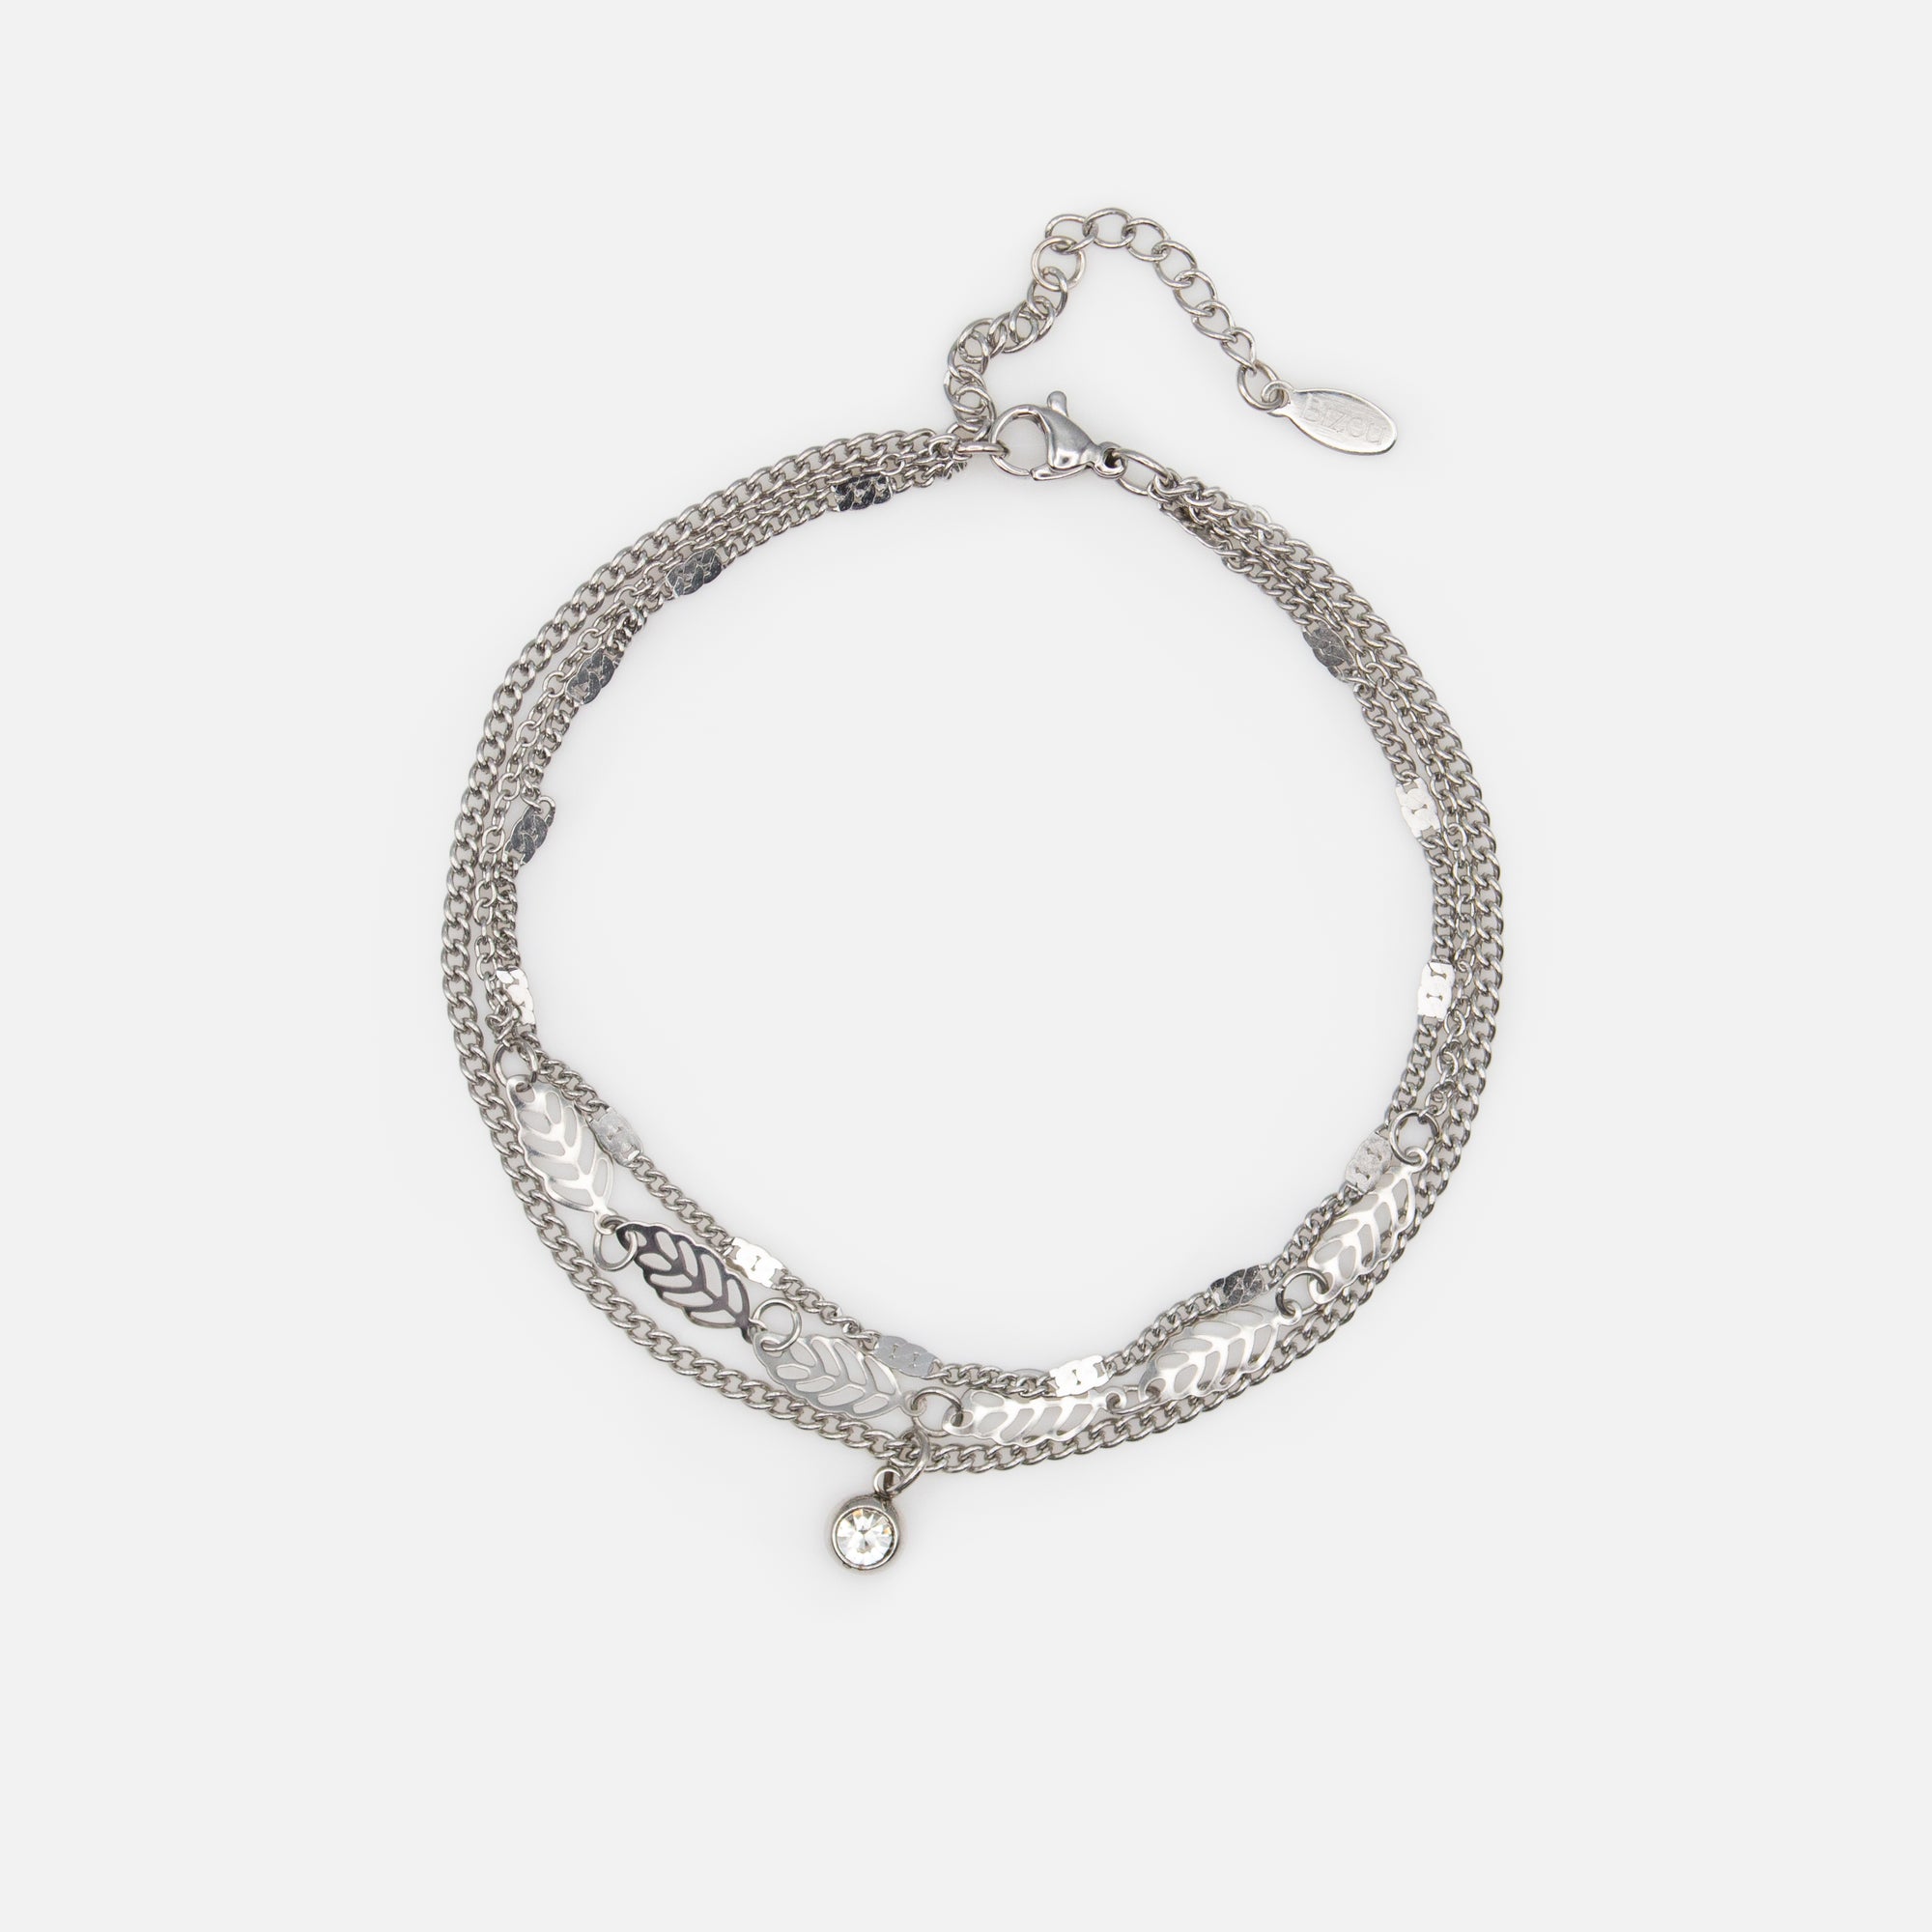 Silvered triple stainless steel anklet